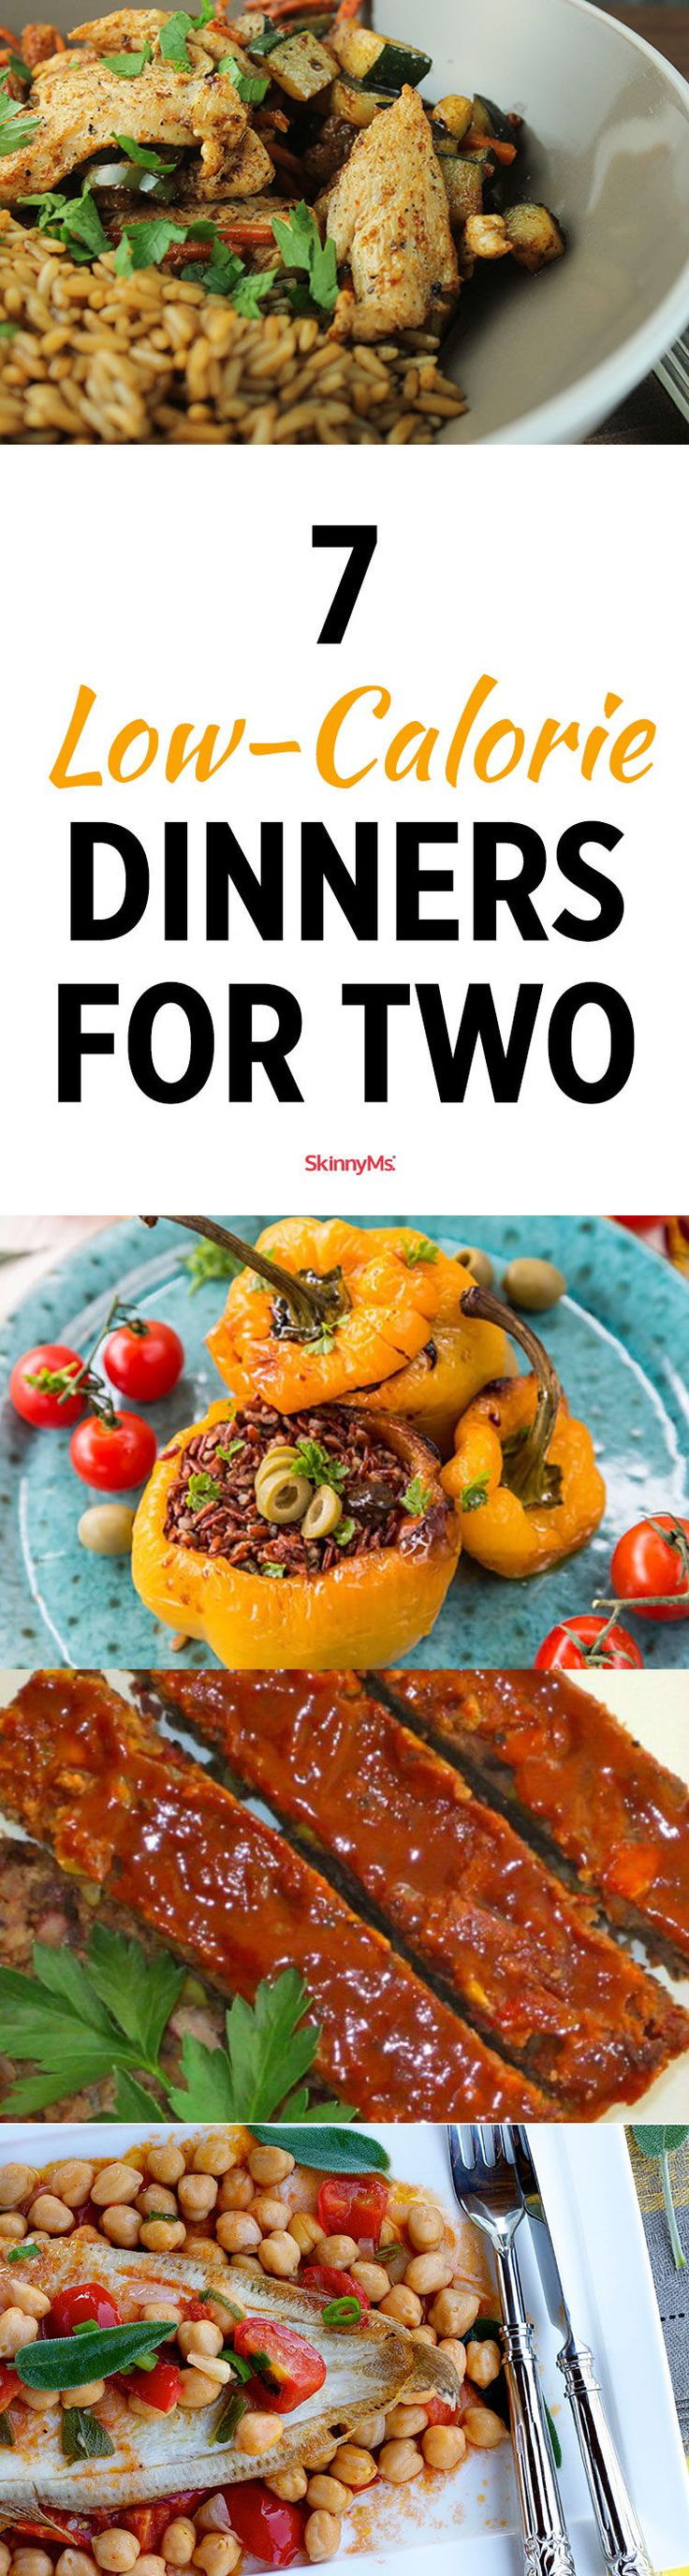 Low Calorie Dinners For 2
 best Skinny Ms Eats images on Pinterest